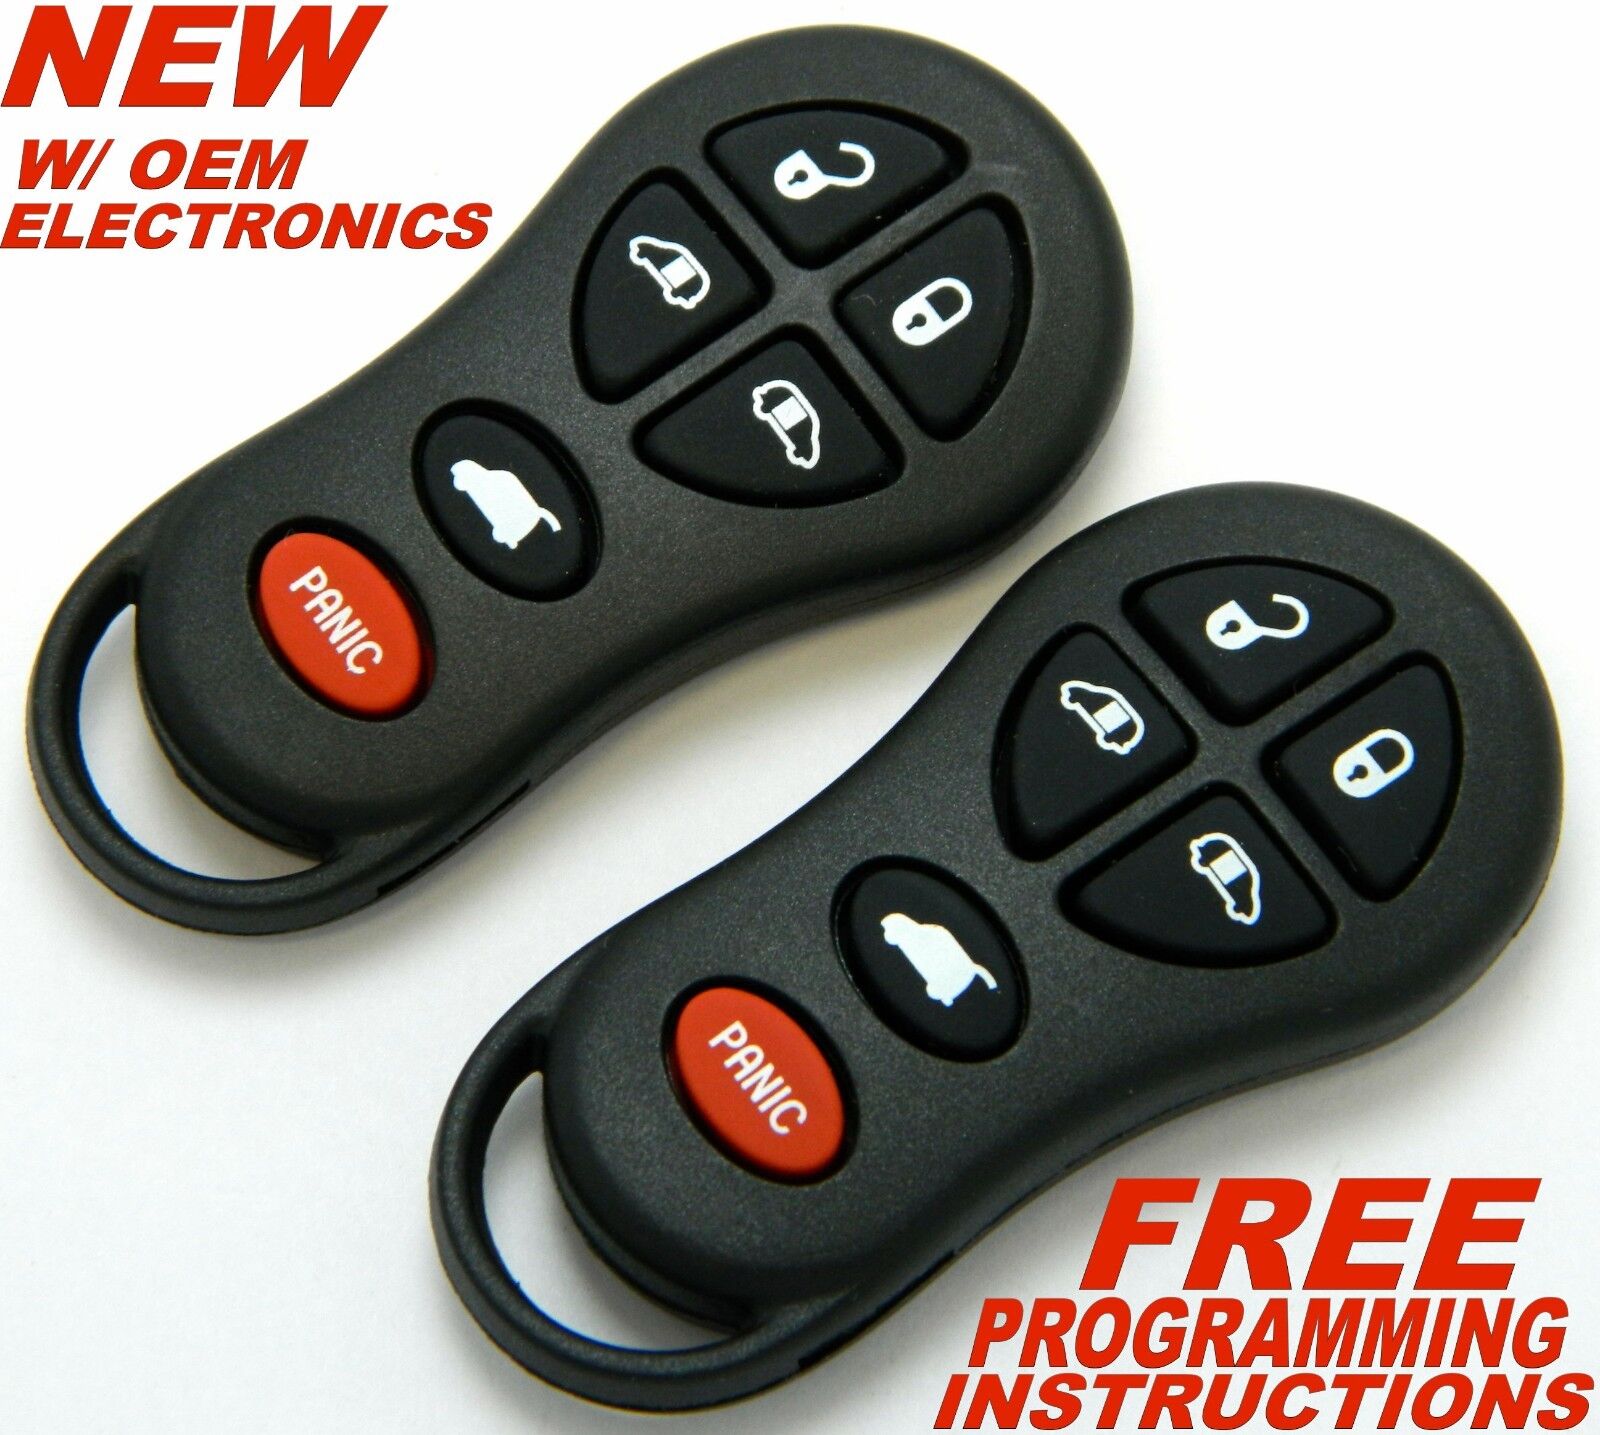 PAIR OEM ELECTRONIC KEYLESS REMOTE FOBS FOR 2001 - 2003 CHRYSLER TOWN & COUNTRY 